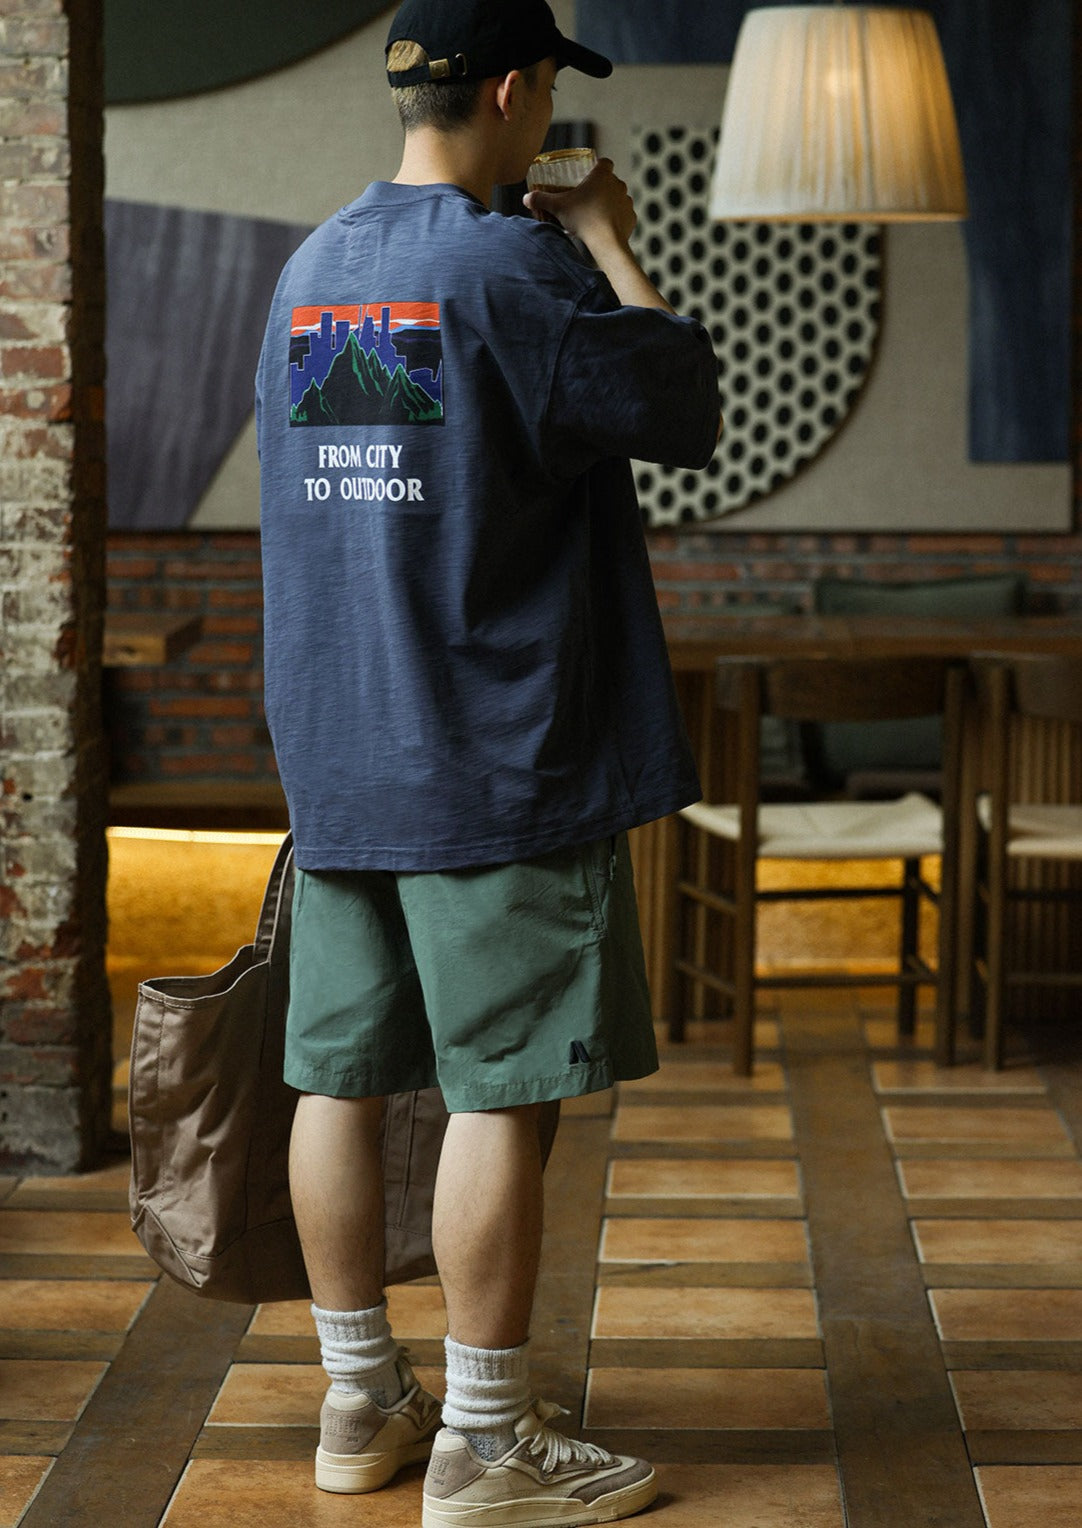 PINSKTBS / FS-140  ARMY letter print shorts